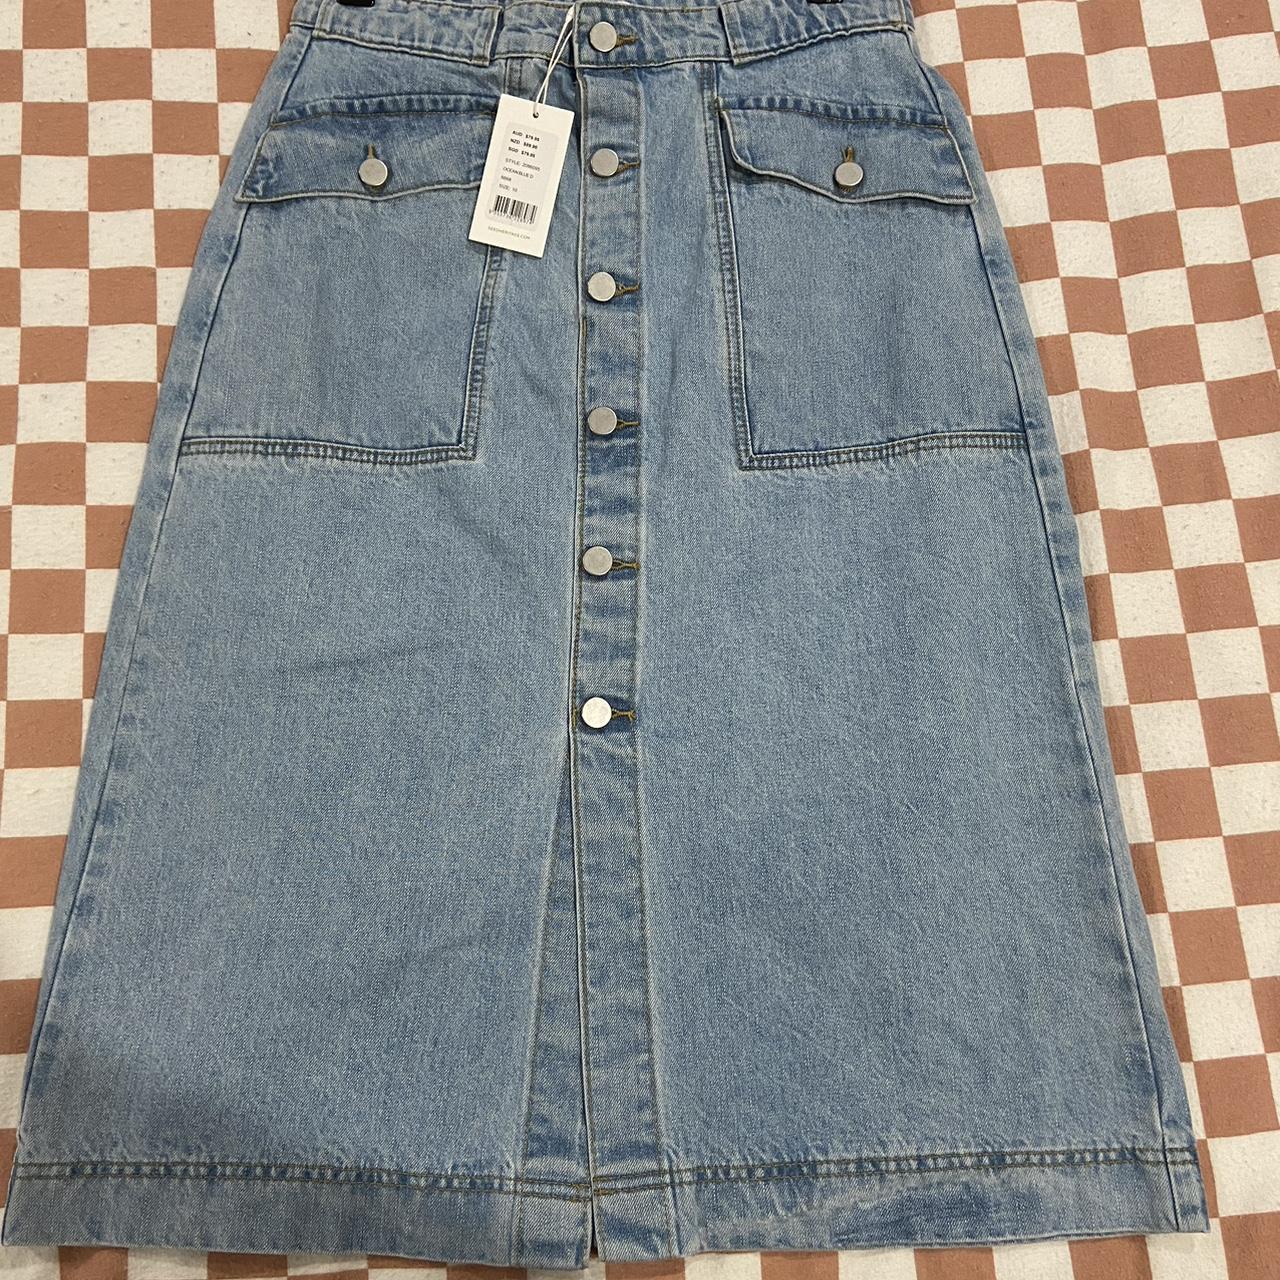 Seed midi denim skirt size 10- Brand new with tags,... - Depop